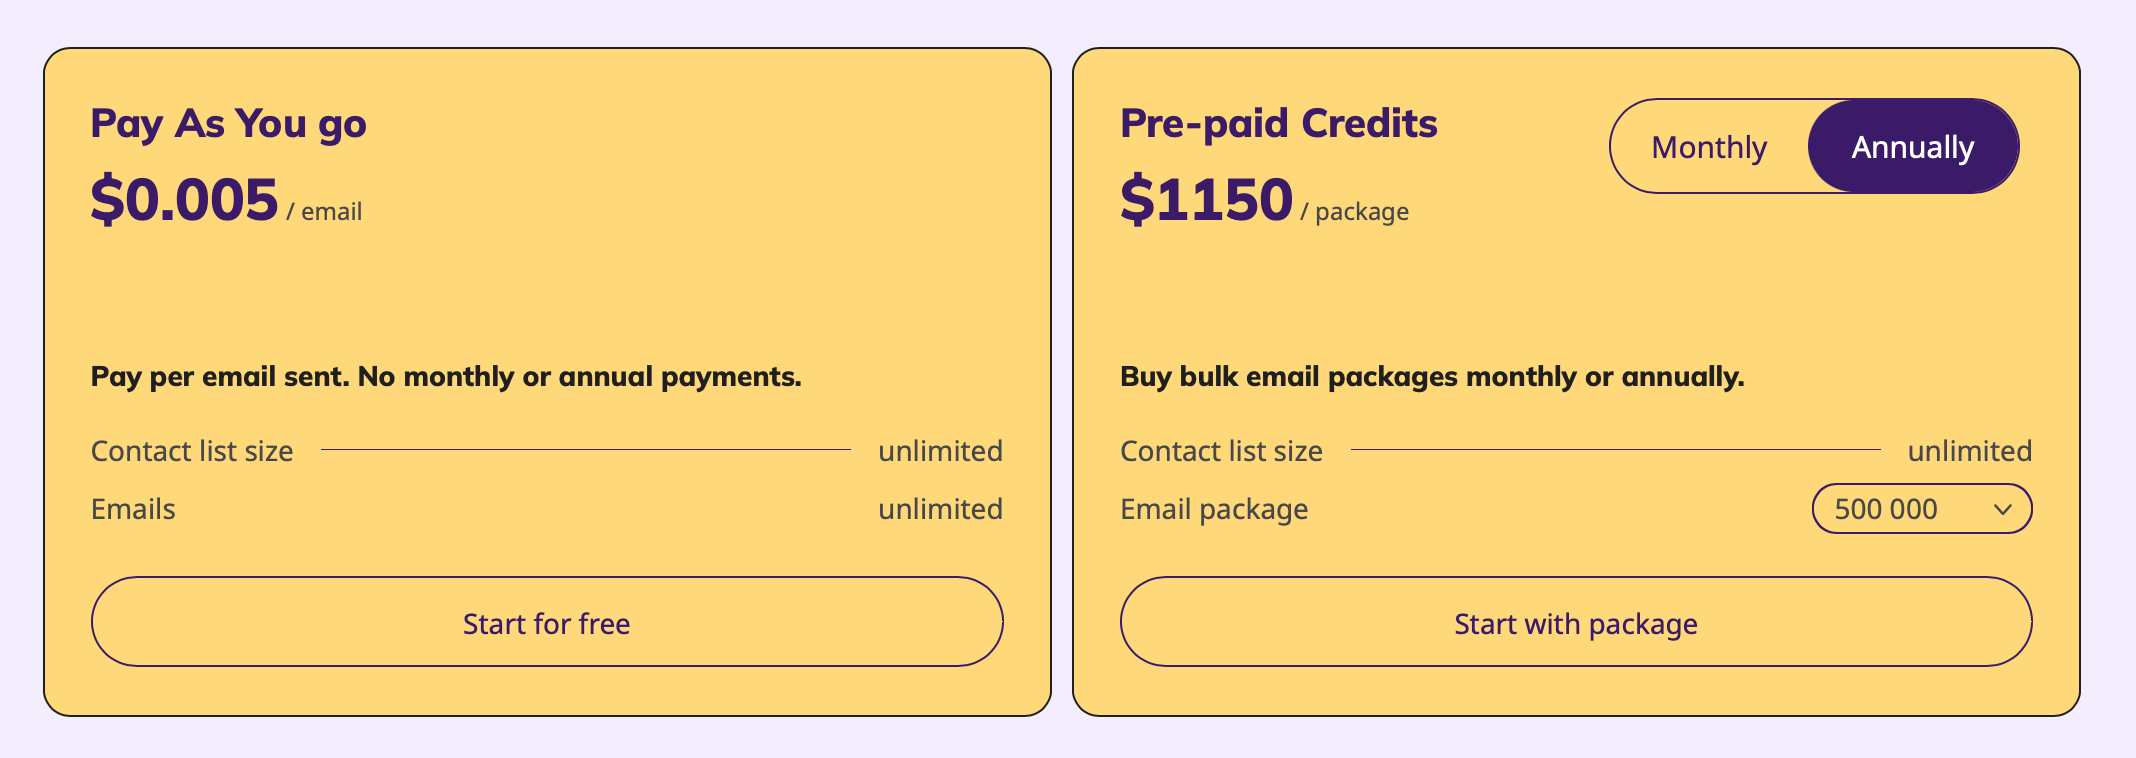 Cost of Selzy packages by annual email volume